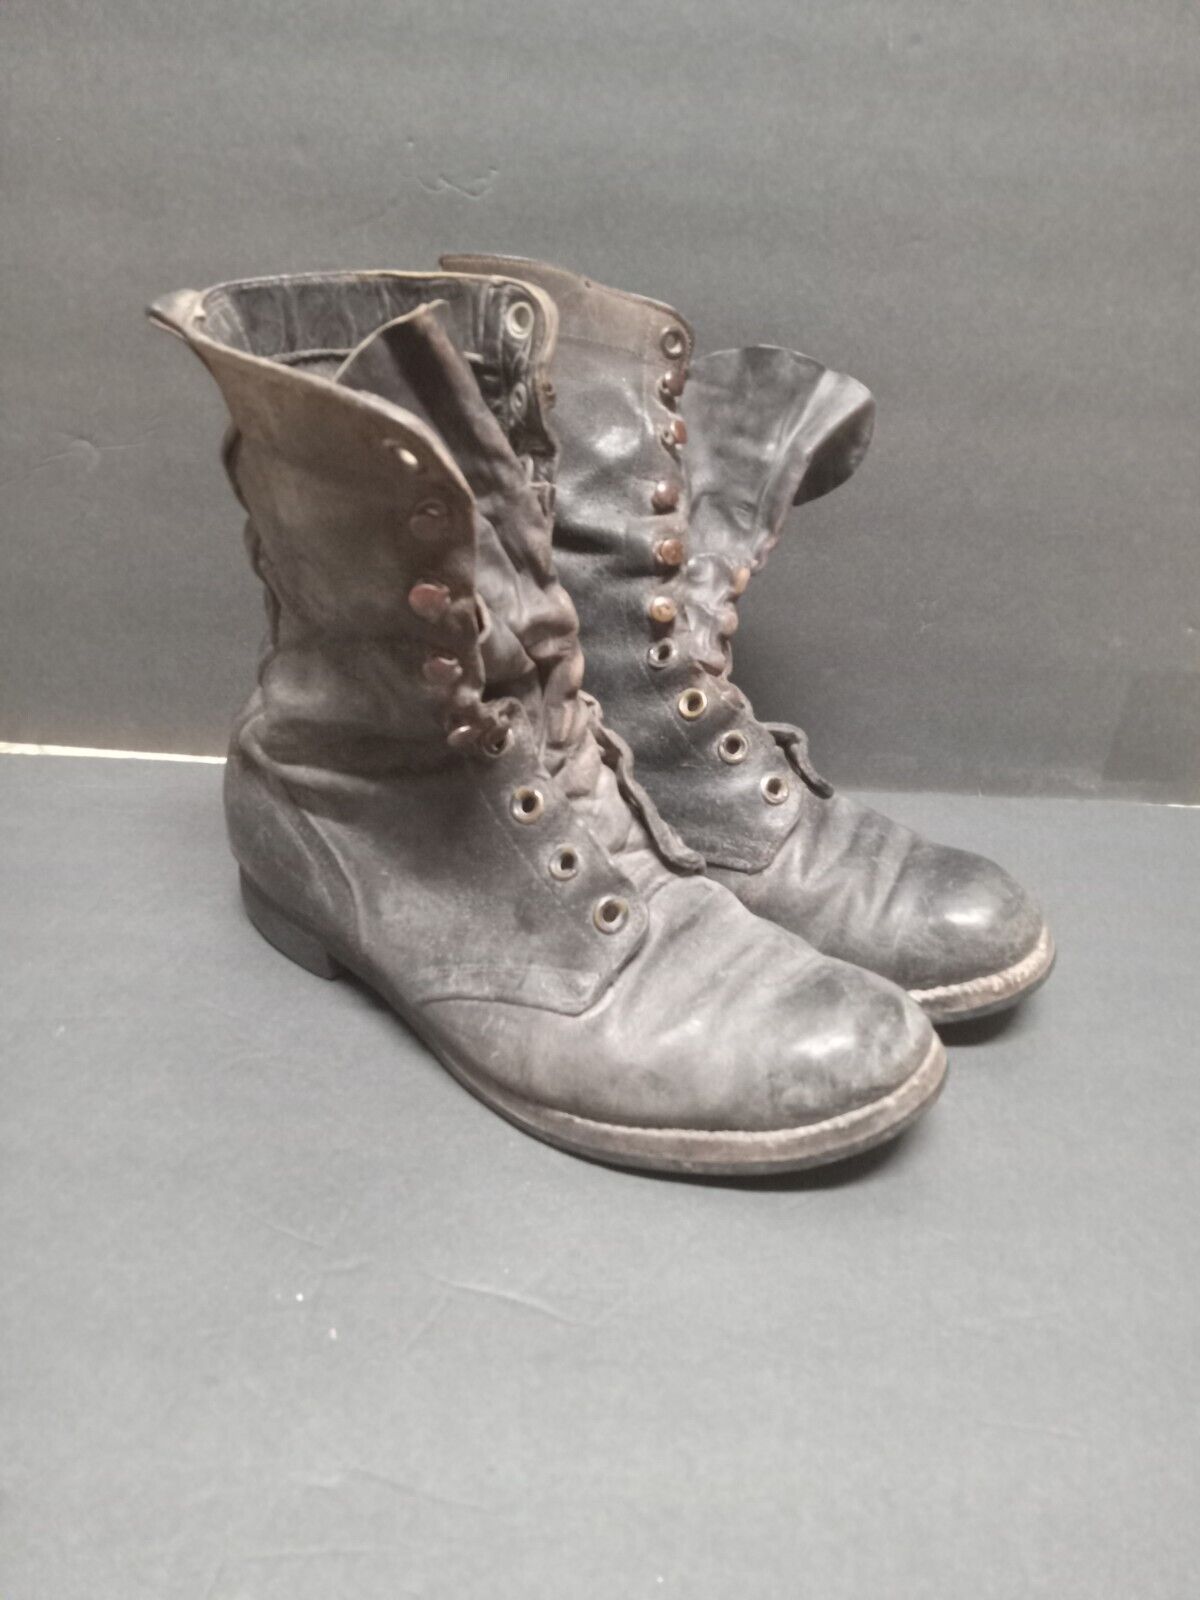 Vintage Ww2 Us Army Style Lace Up Boots Great For Display